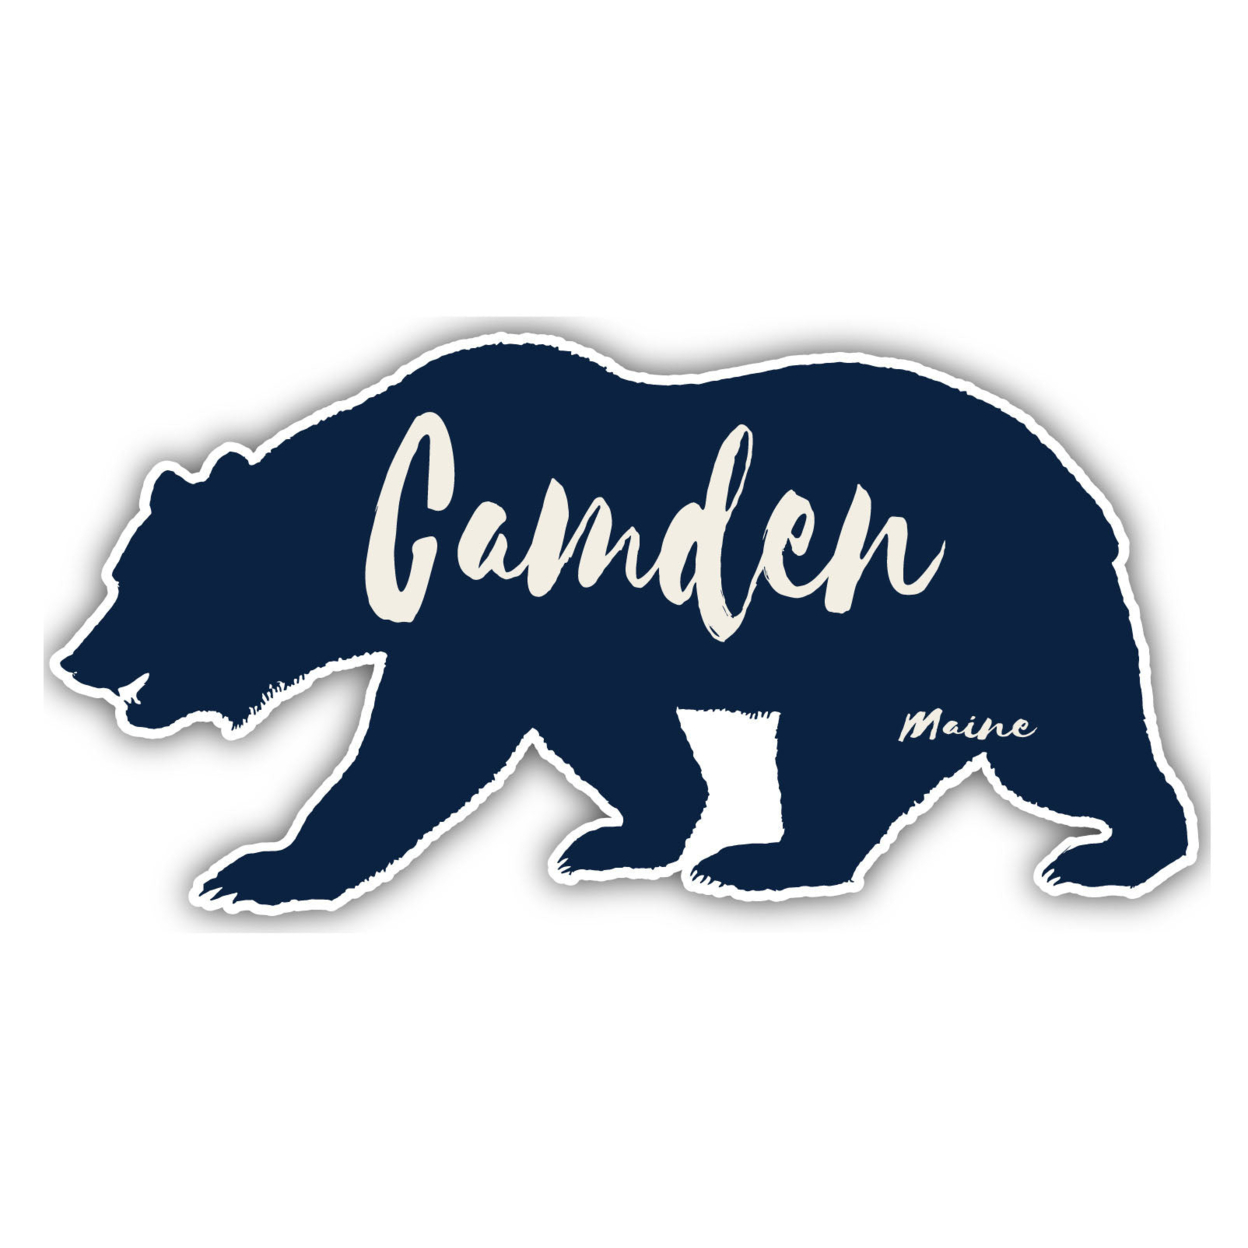 Camden Maine Souvenir Decorative Stickers (Choose Theme And Size) - 4-Pack, 2-Inch, Bear